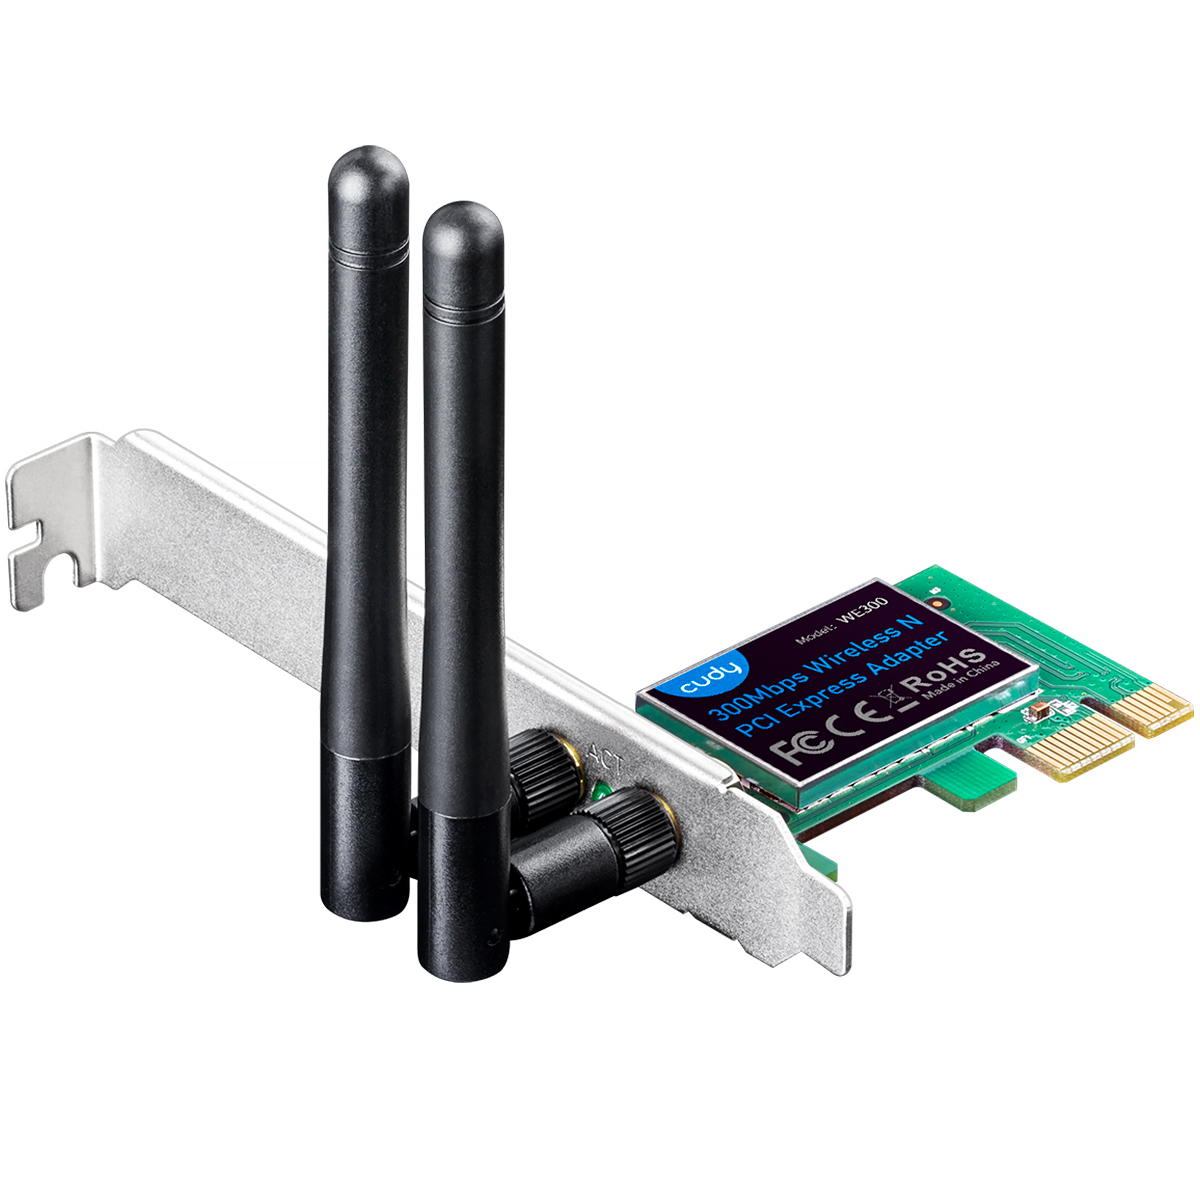 

Cudy 300Mbps Wireless N PCI Express Networking Adapter WE300